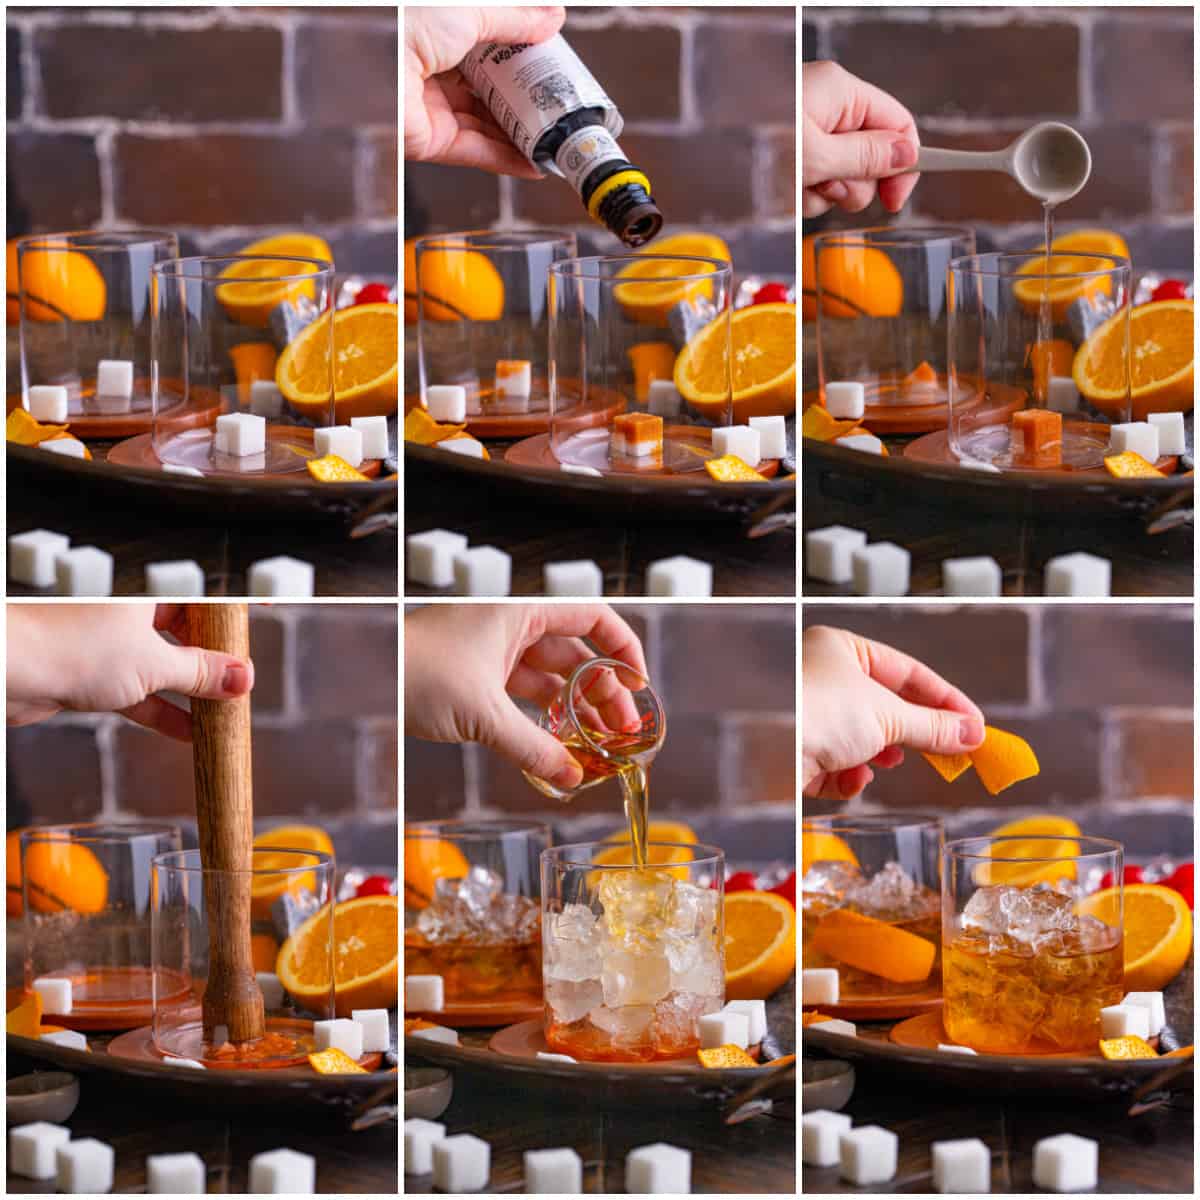 Step by step photos on how to make an Old Fashioned Cocktail.